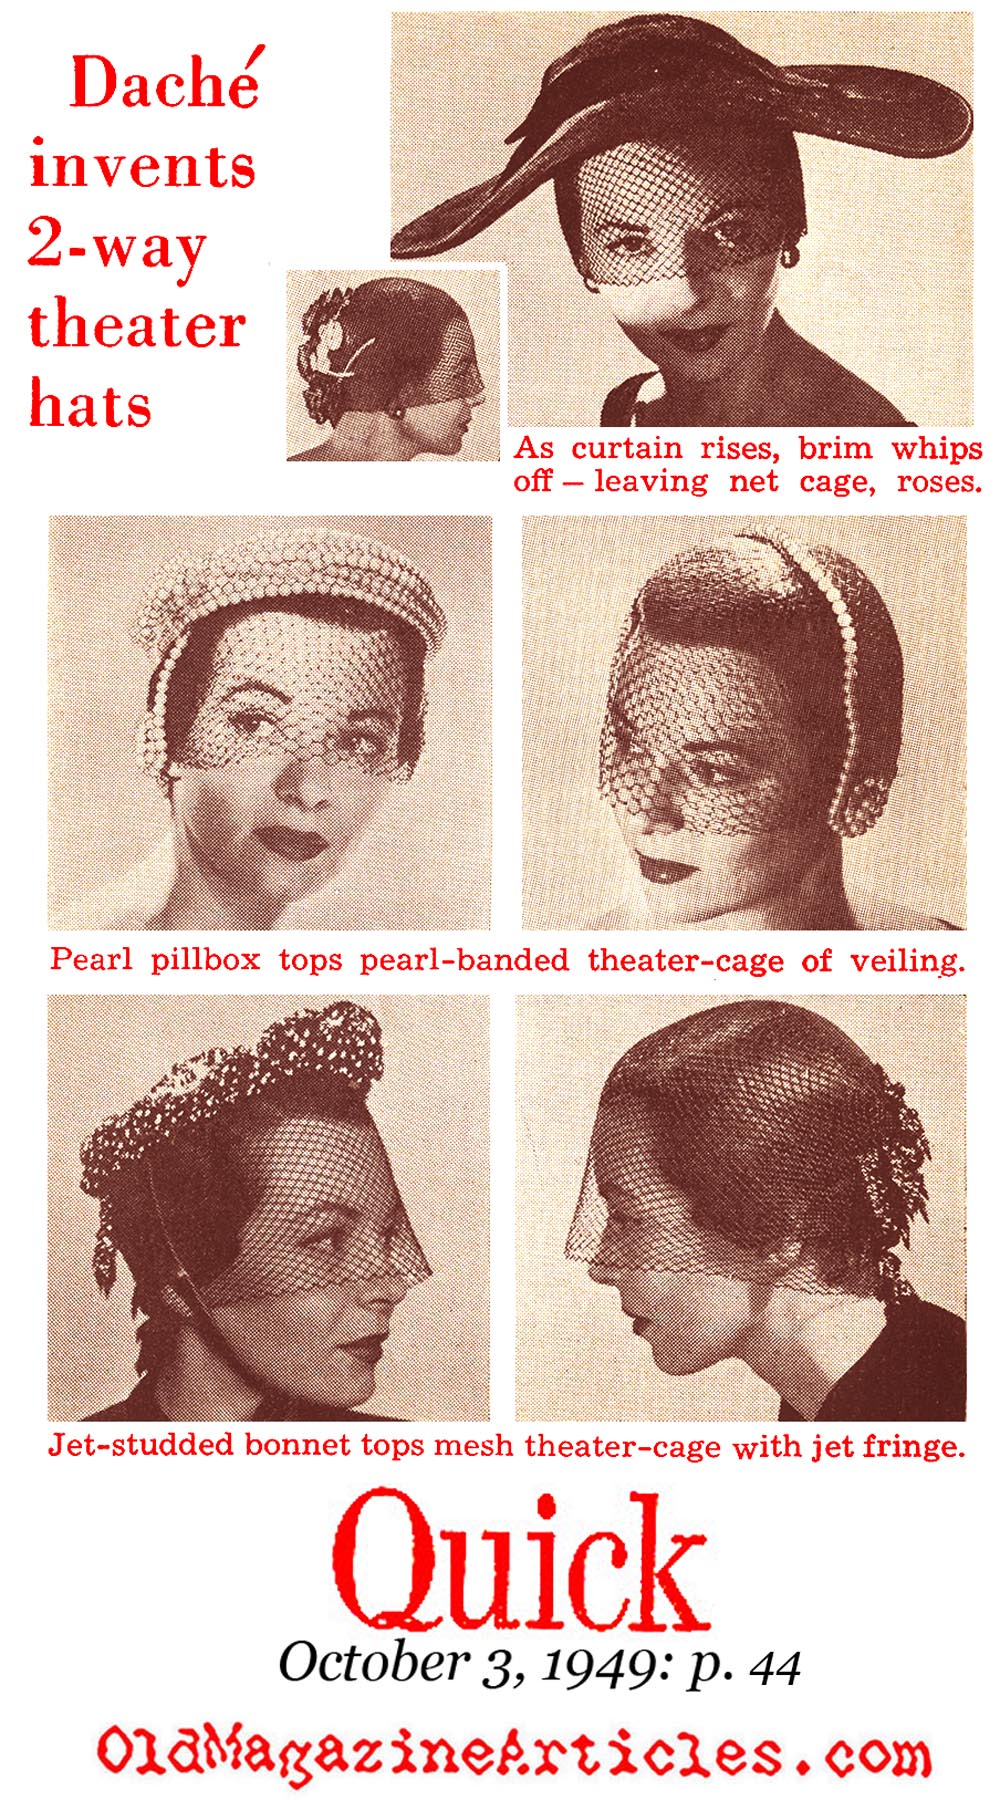 Theatre Hats by Lilly Daché (Quick Magazine, 1949)